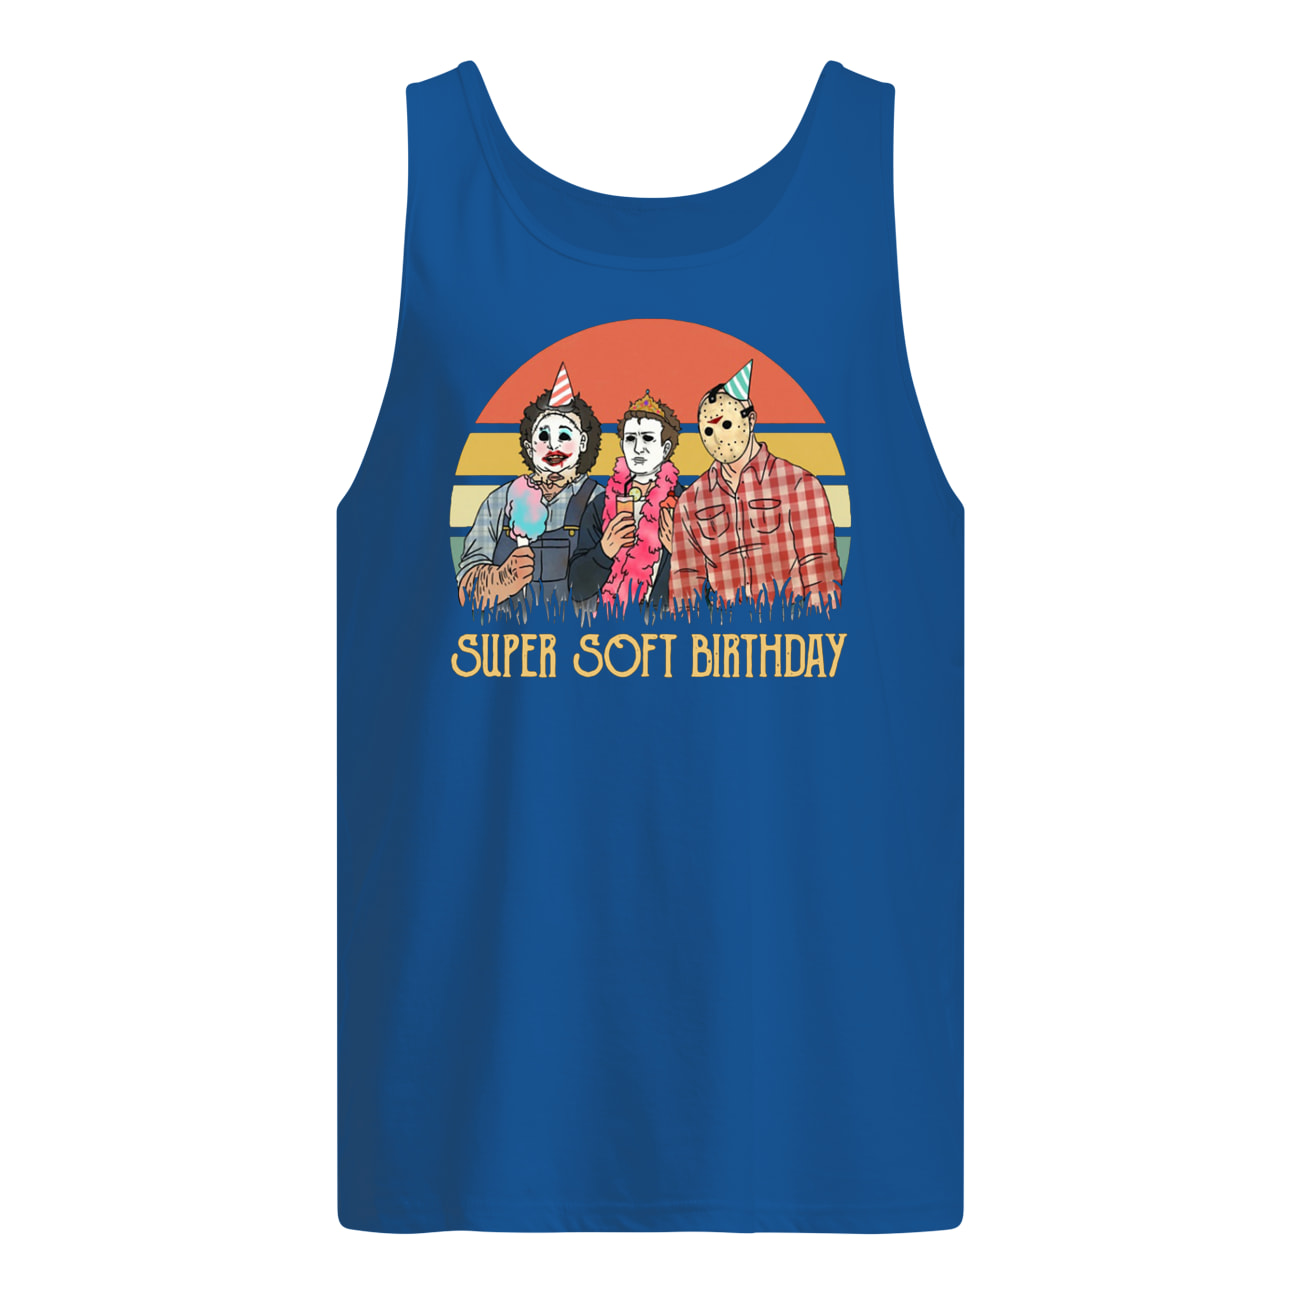 Vintage horror movie characters super soft birthday tank top